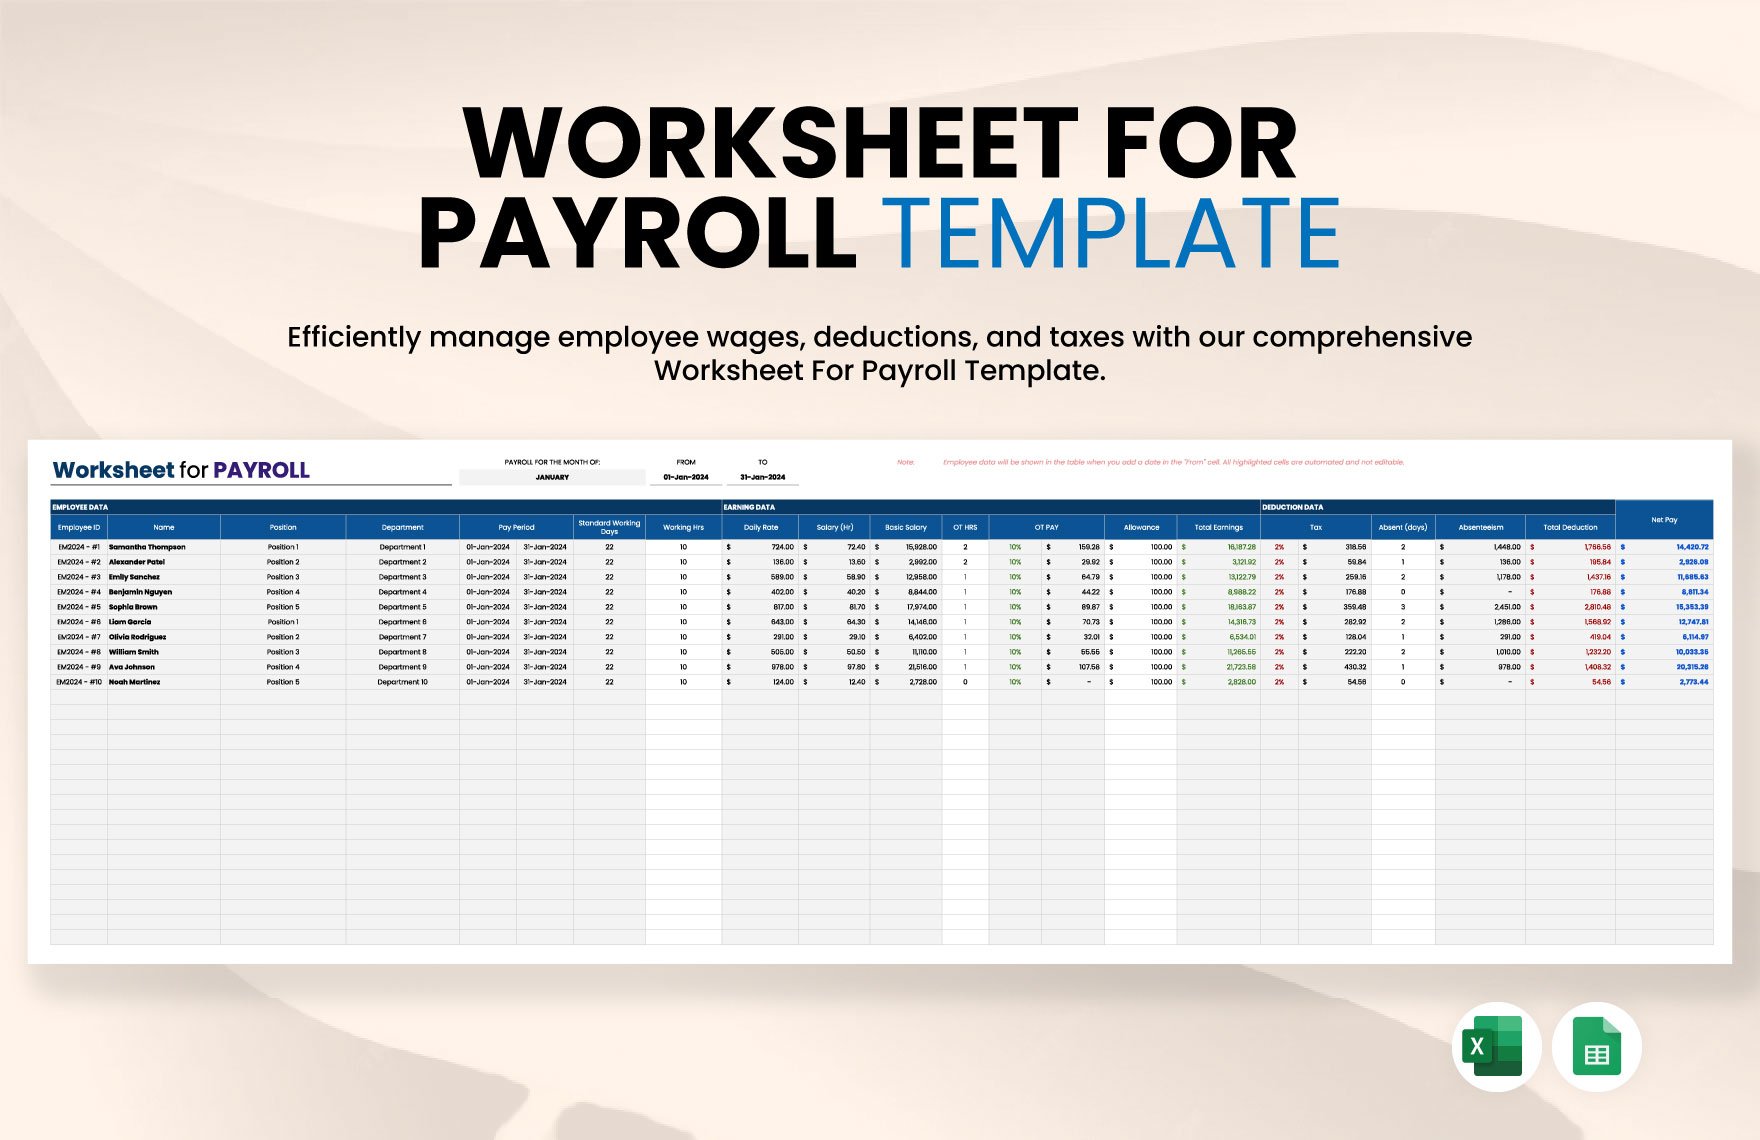 Worksheet For Payroll Template in Excel, Google Sheets